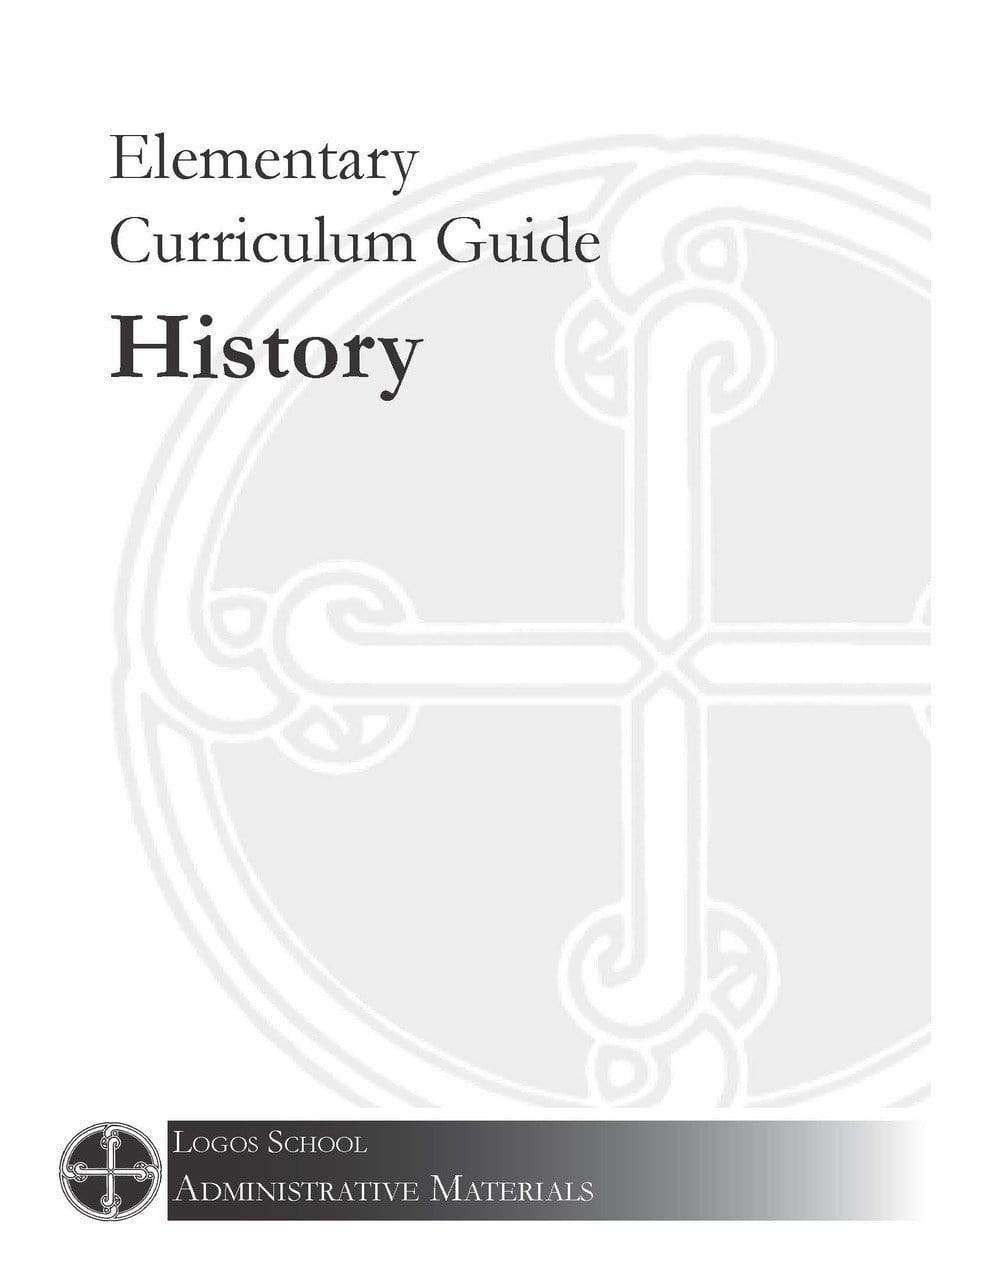 Elementary Curriculum Guide - History (Download)